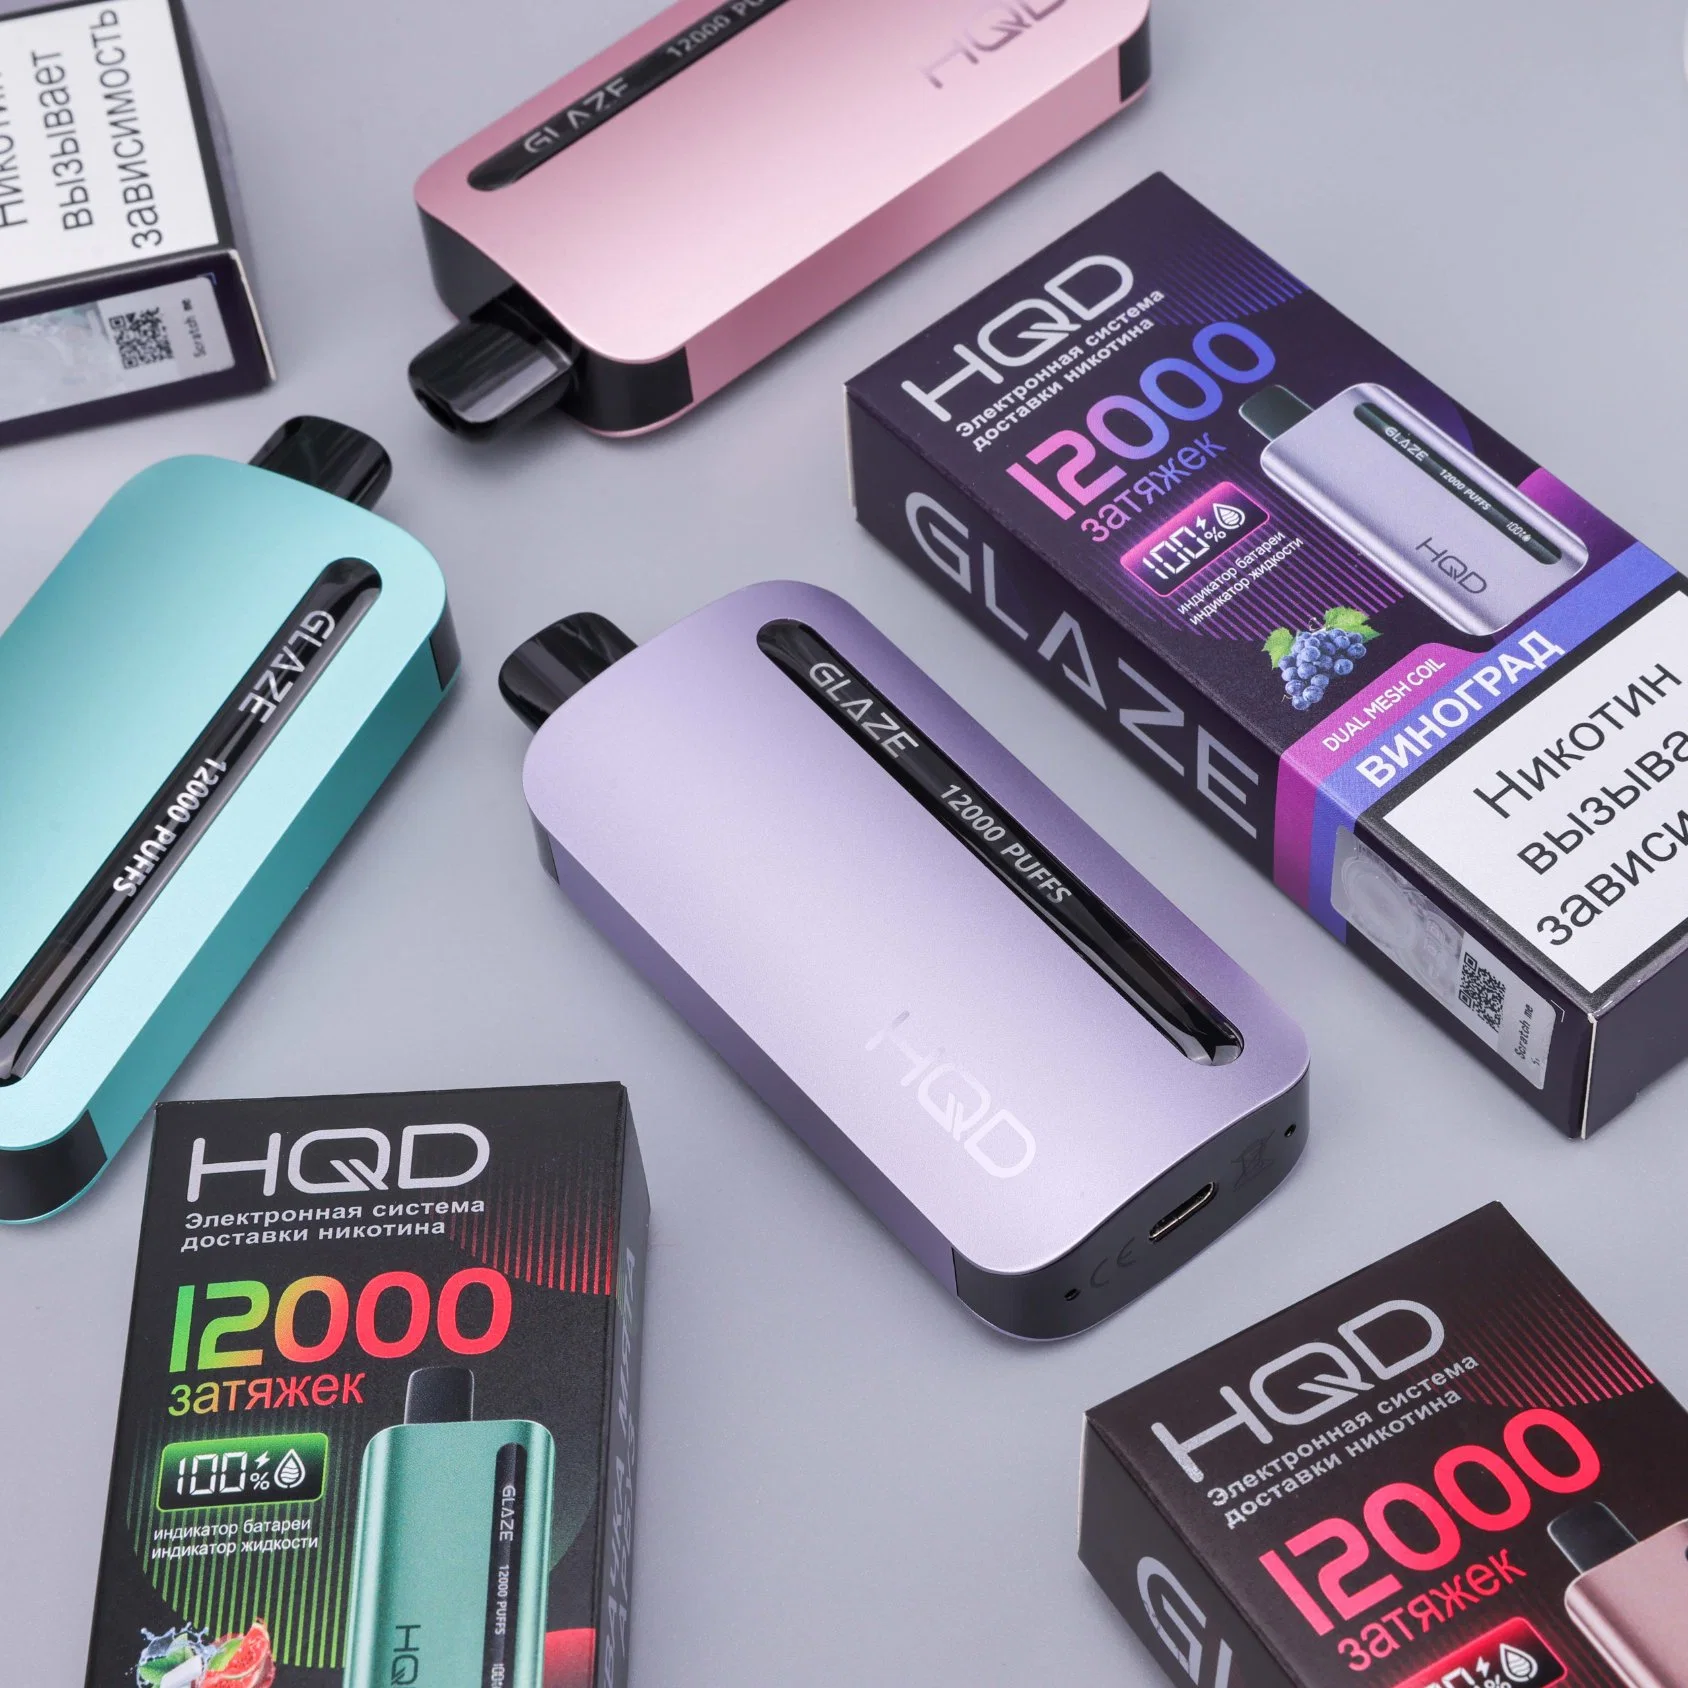 Latest Disposable/Chargeable Vape 12000 1688 Factory Direct Hqd Glaze 6000/7000/8000/9000/10000 Puffs E-Cig